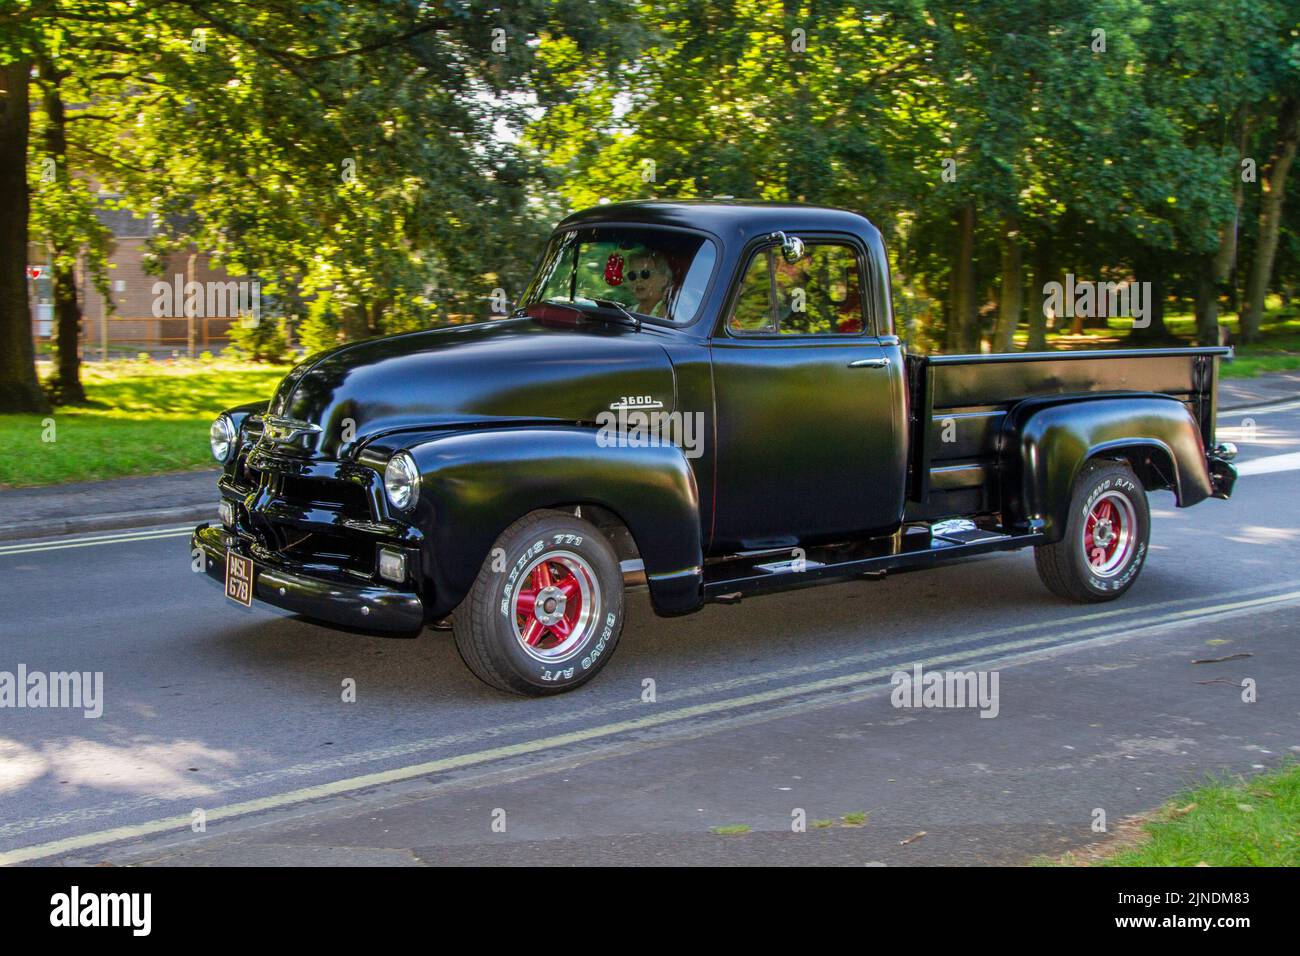 1954, 50s, fifties Chevrolet GMC. 6600cc Chevvy; Vintage cars on display at the 13th Lytham Hall Summer Classic Car & Motorcycle Show, a Classic Vintage Collectible Transport Festival. Stock Photo